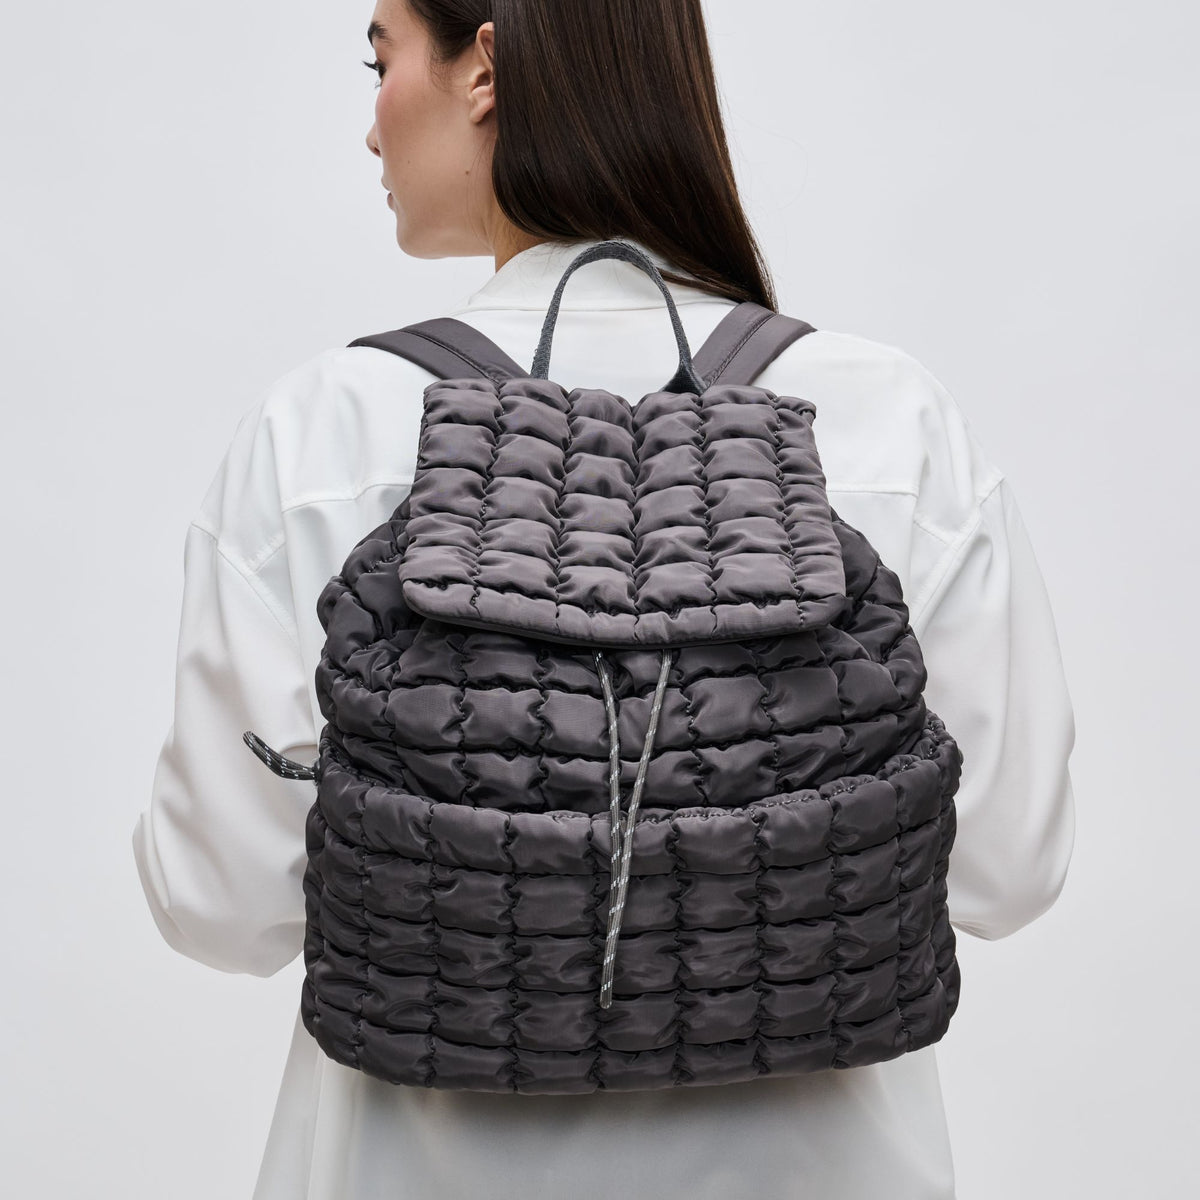 Woman wearing Carbon Sol and Selene Vitality Backpack 841764108508 View 1 | Carbon